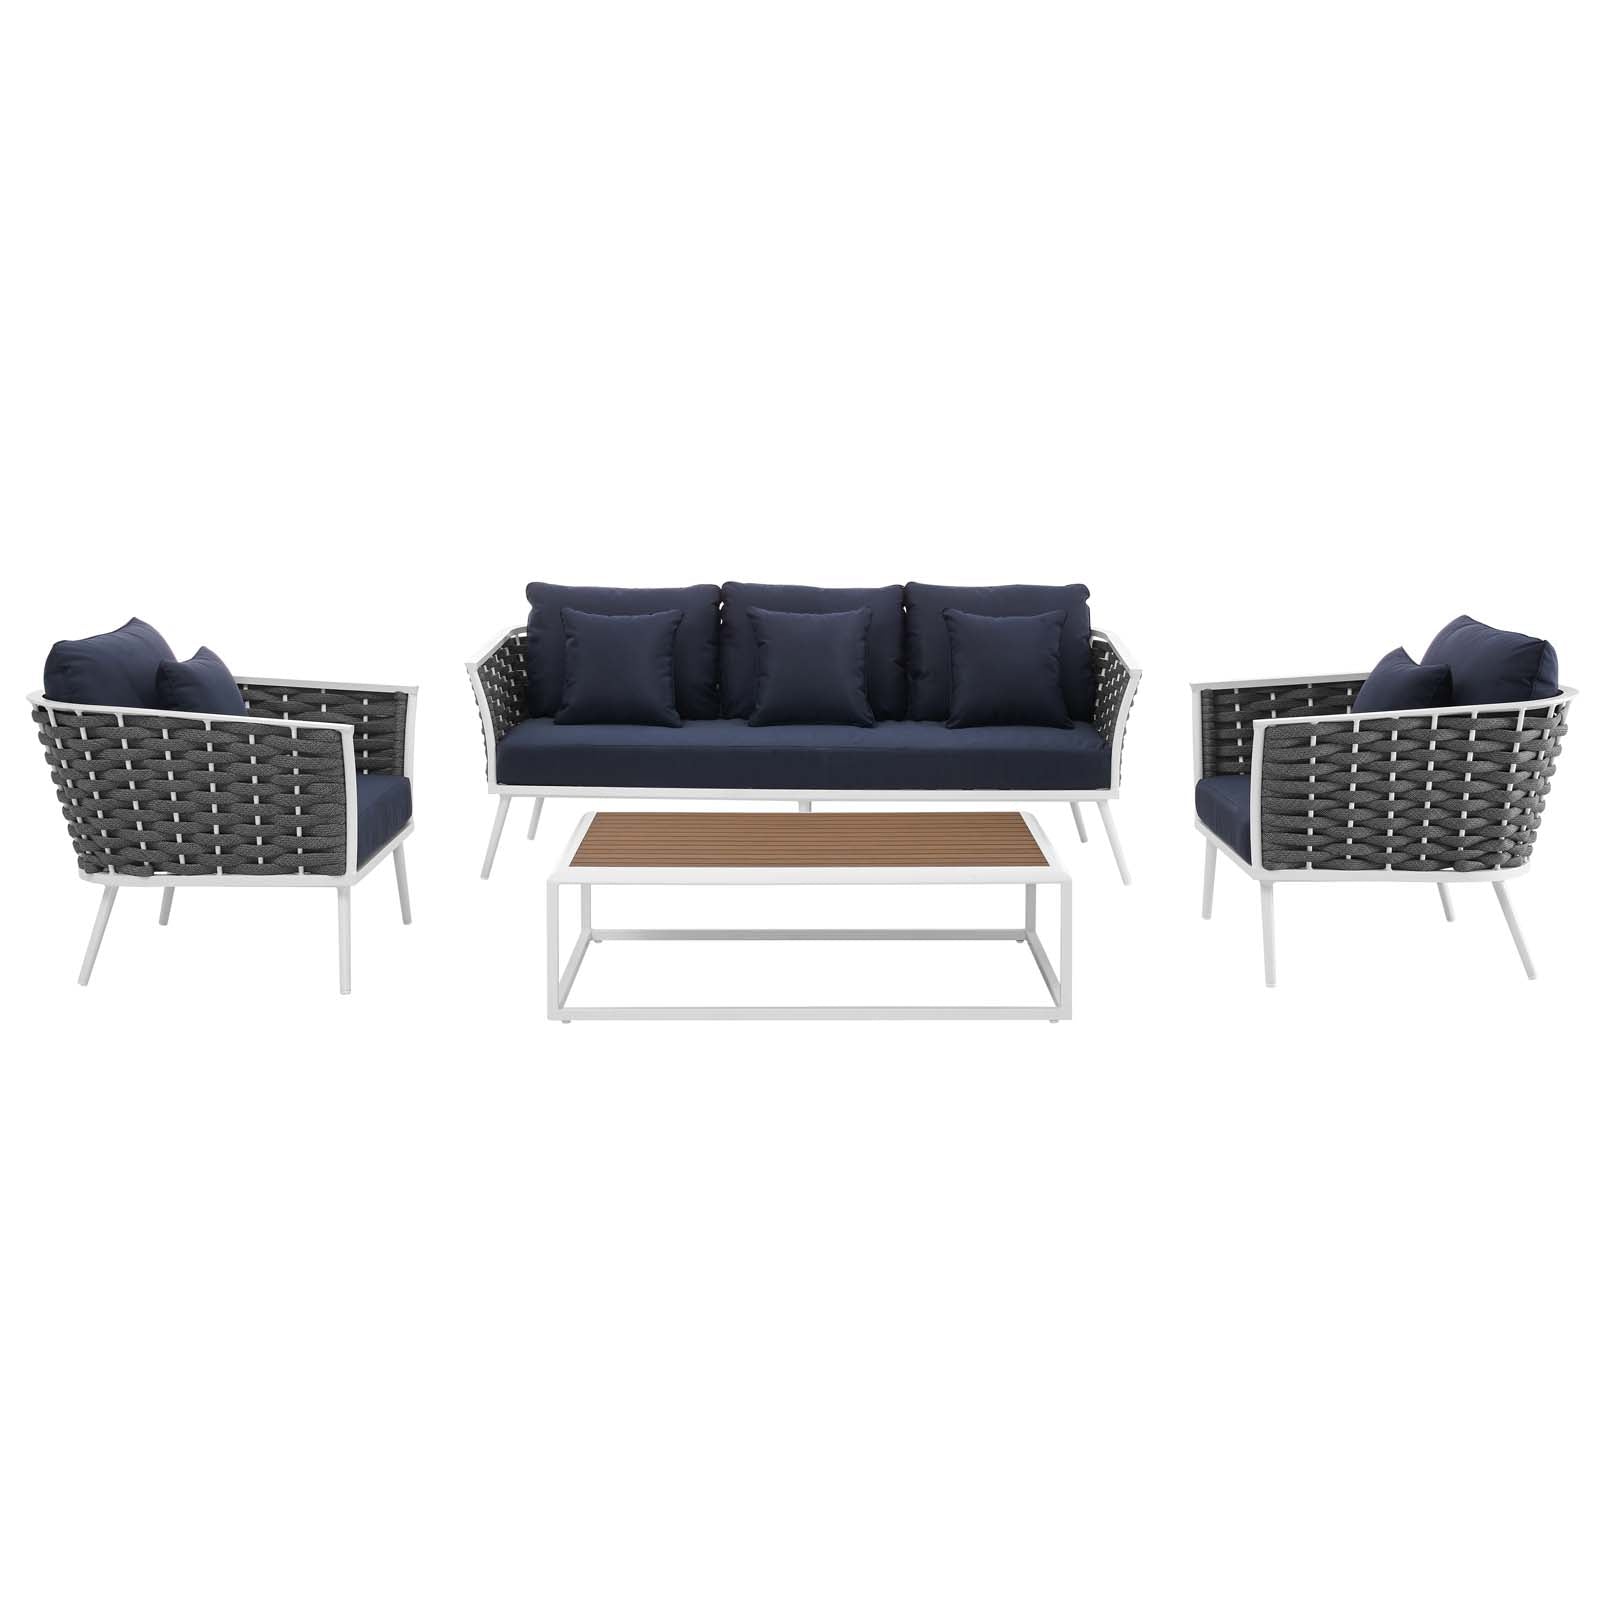 Stance 4 Piece Outdoor 107.5"W Patio Aluminum Sectional Sofa Set White